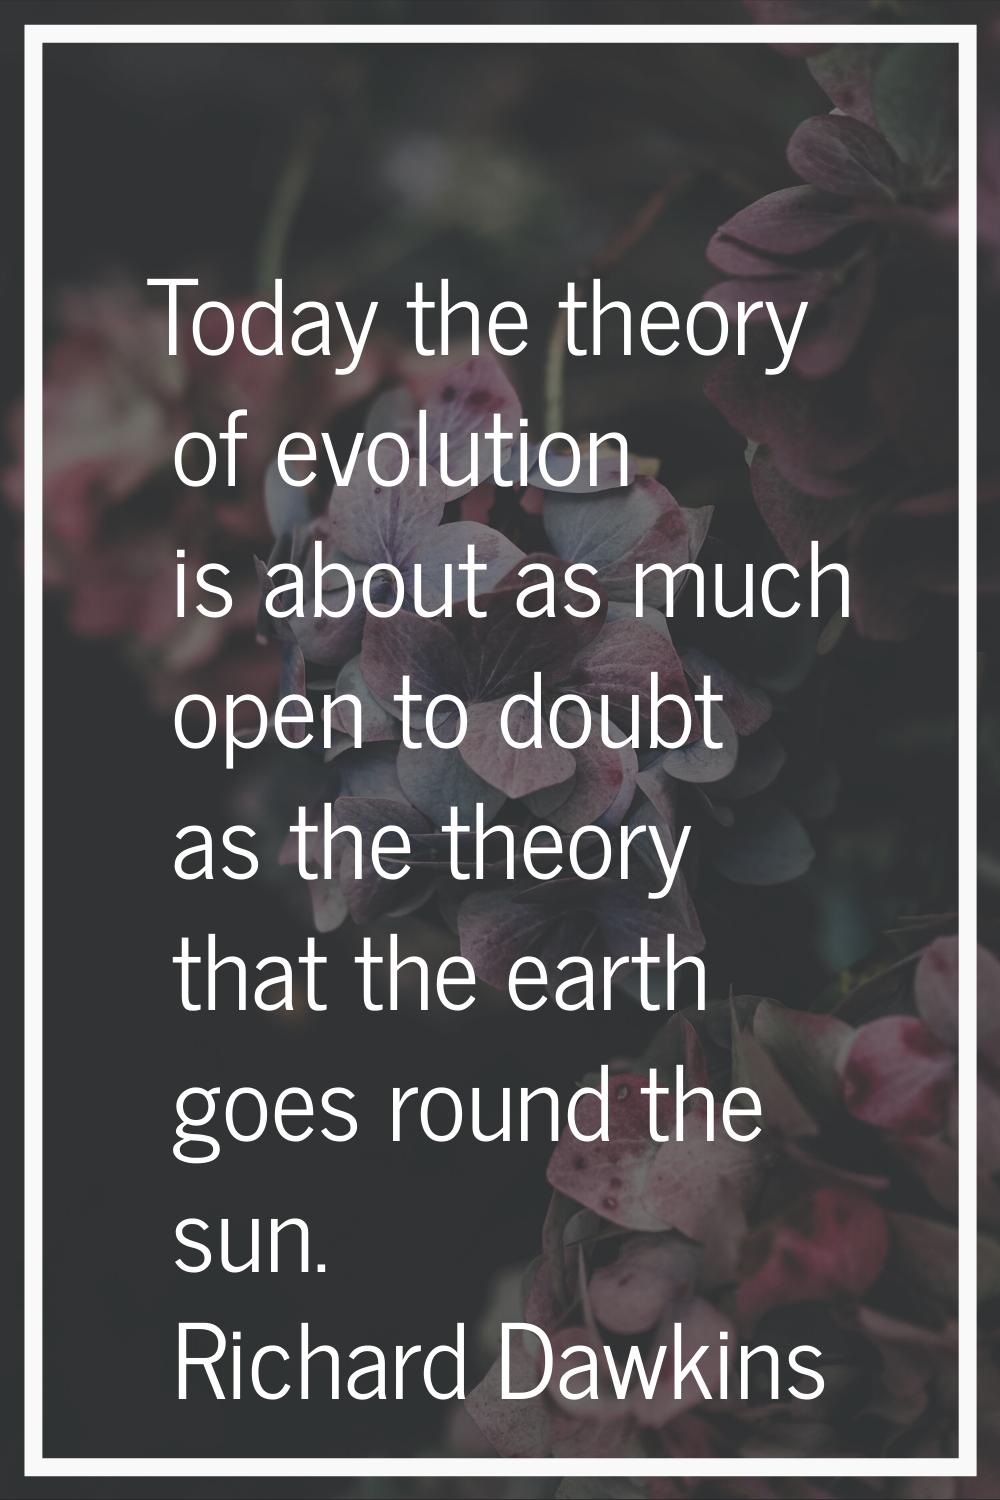 Today the theory of evolution is about as much open to doubt as the theory that the earth goes roun